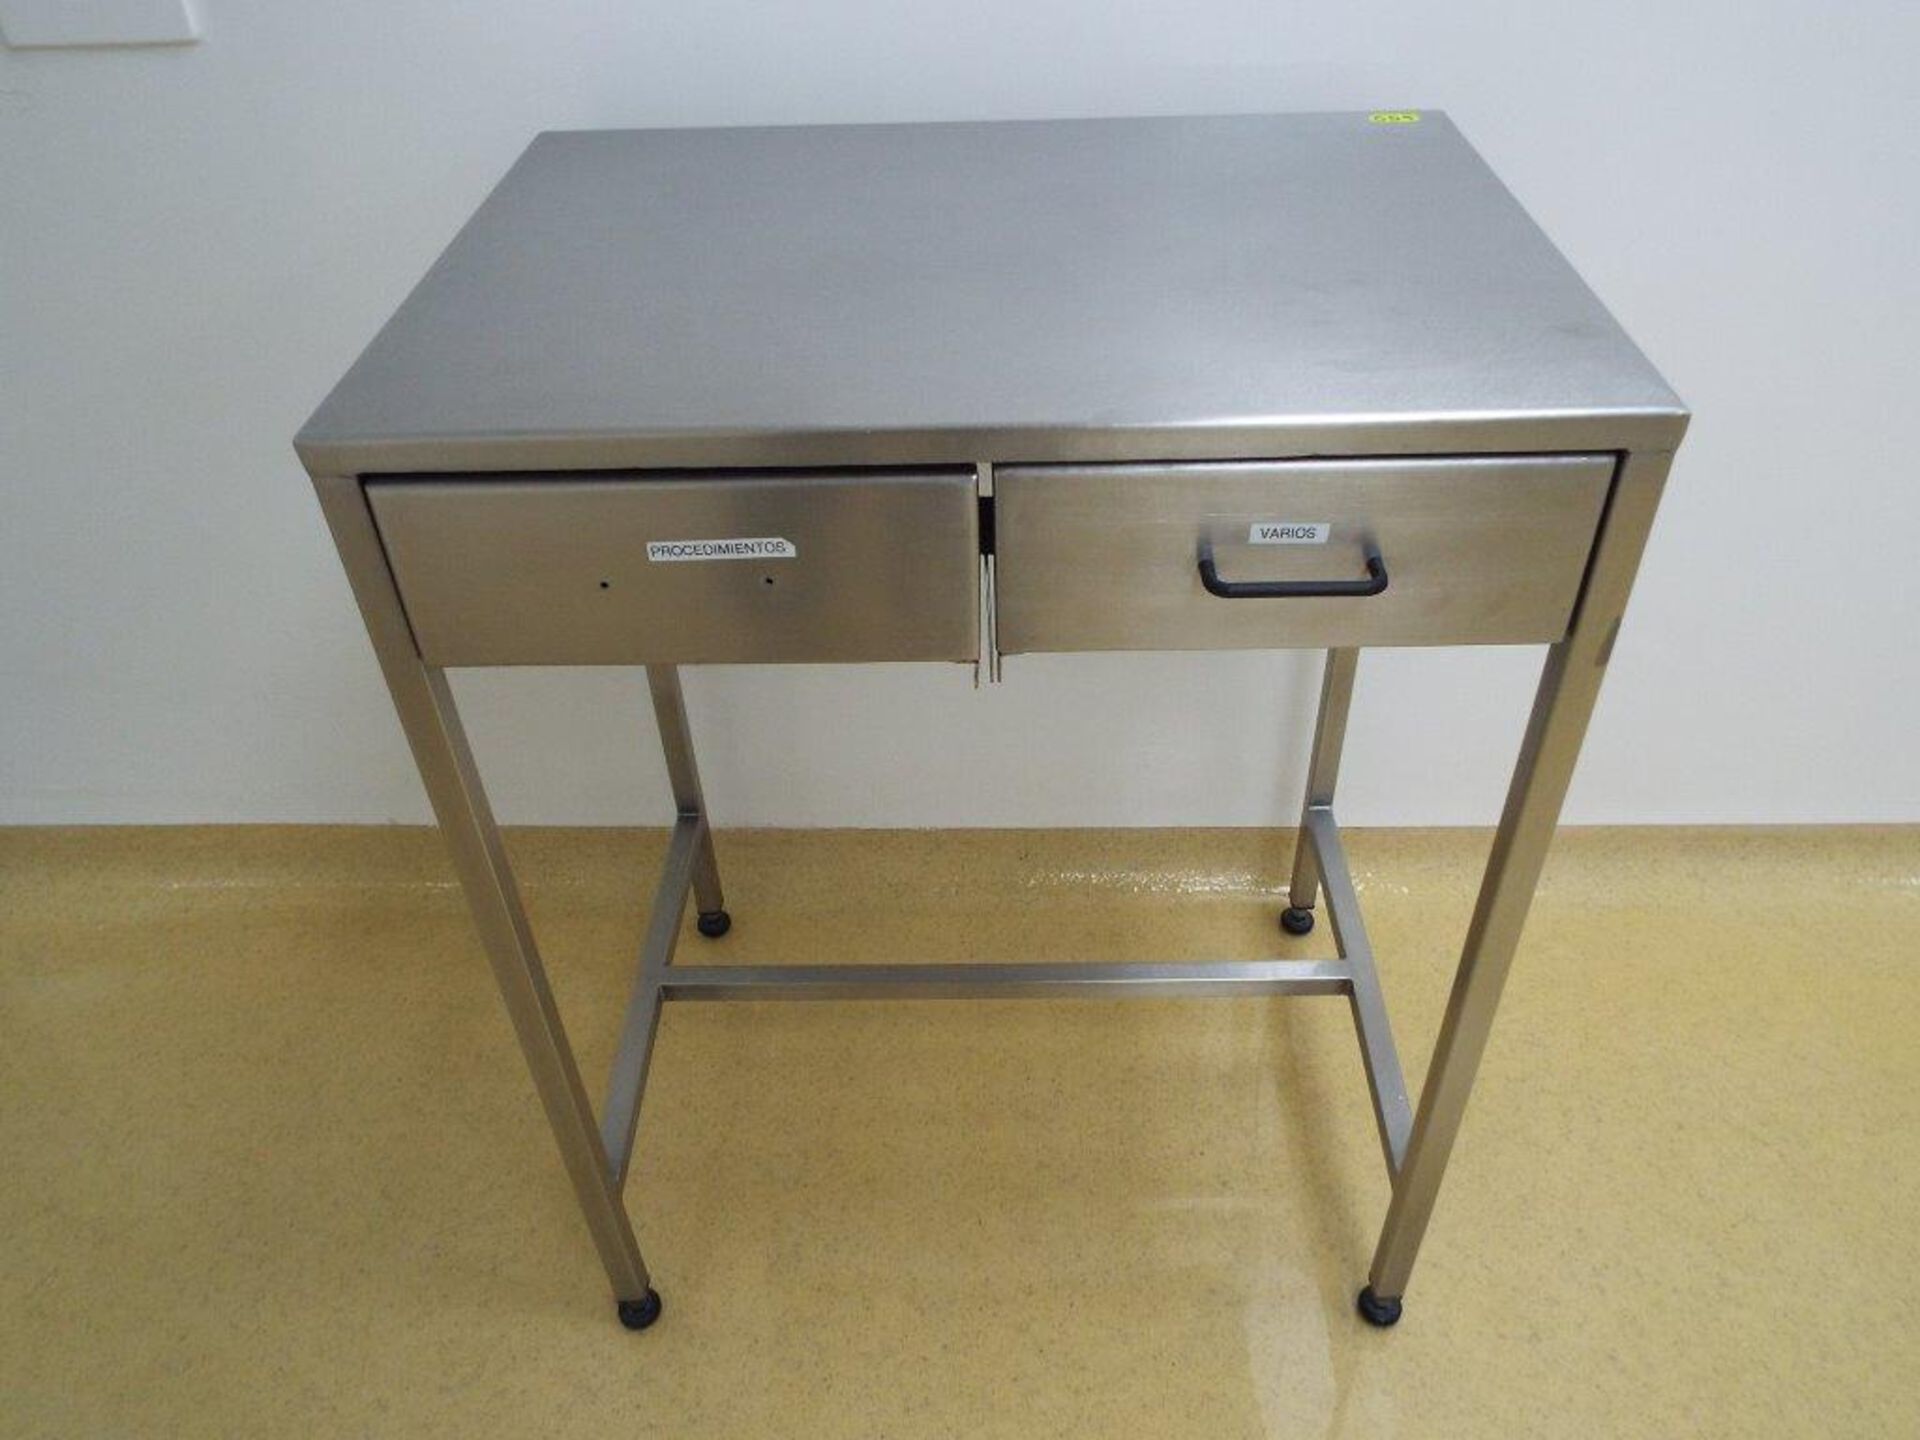 Stainless Steel Table with 2 drawers